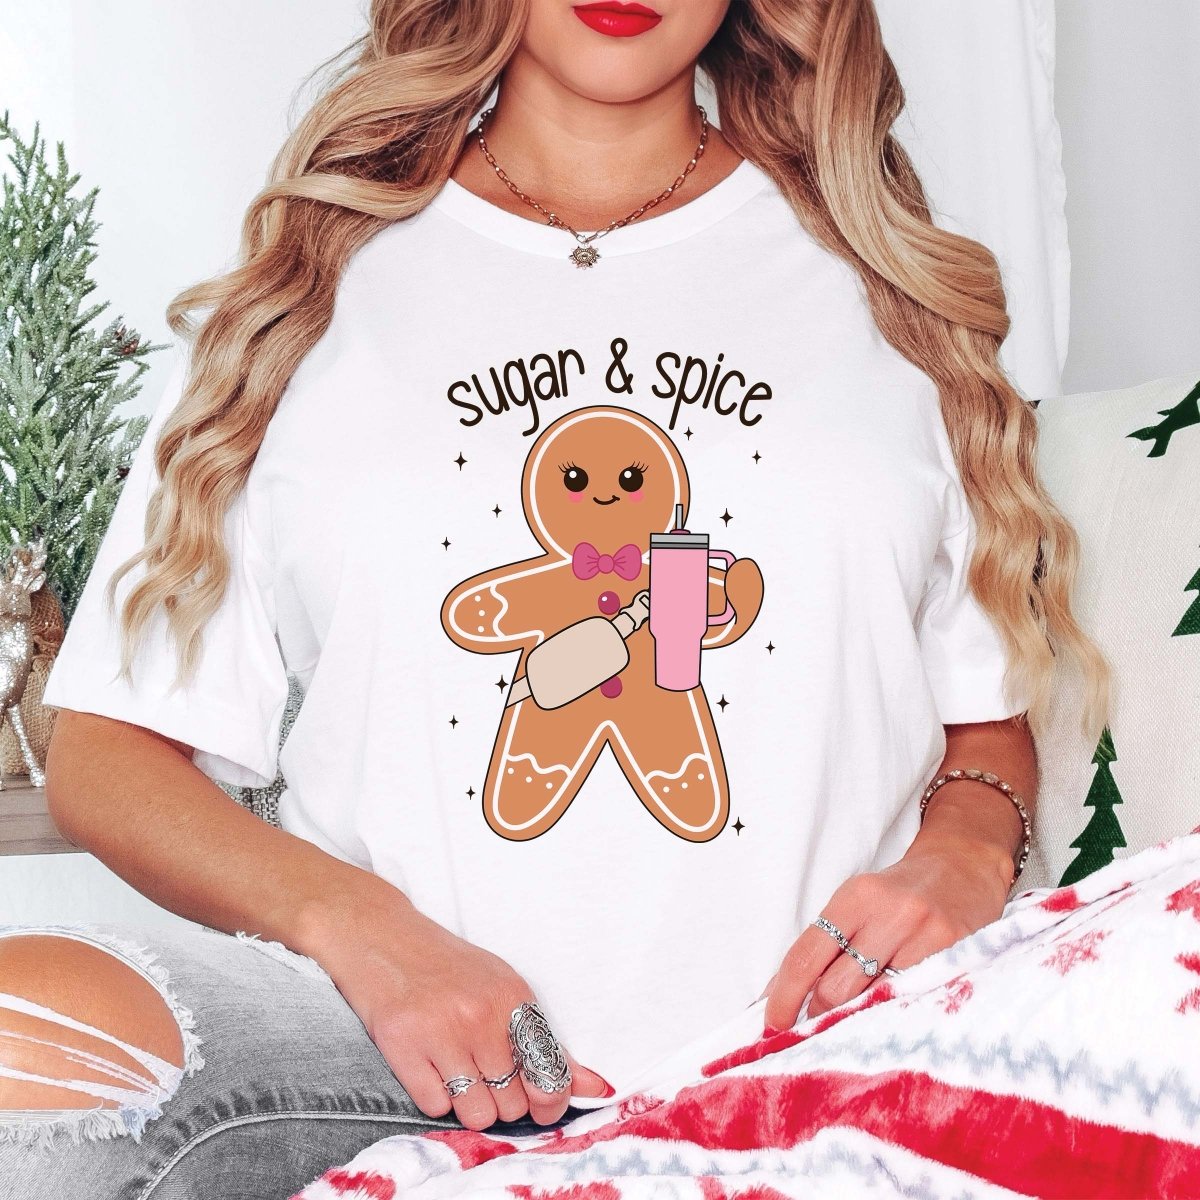 Sugar and Spice Gingerbread Man Wholesale Tee - Limeberry Designs